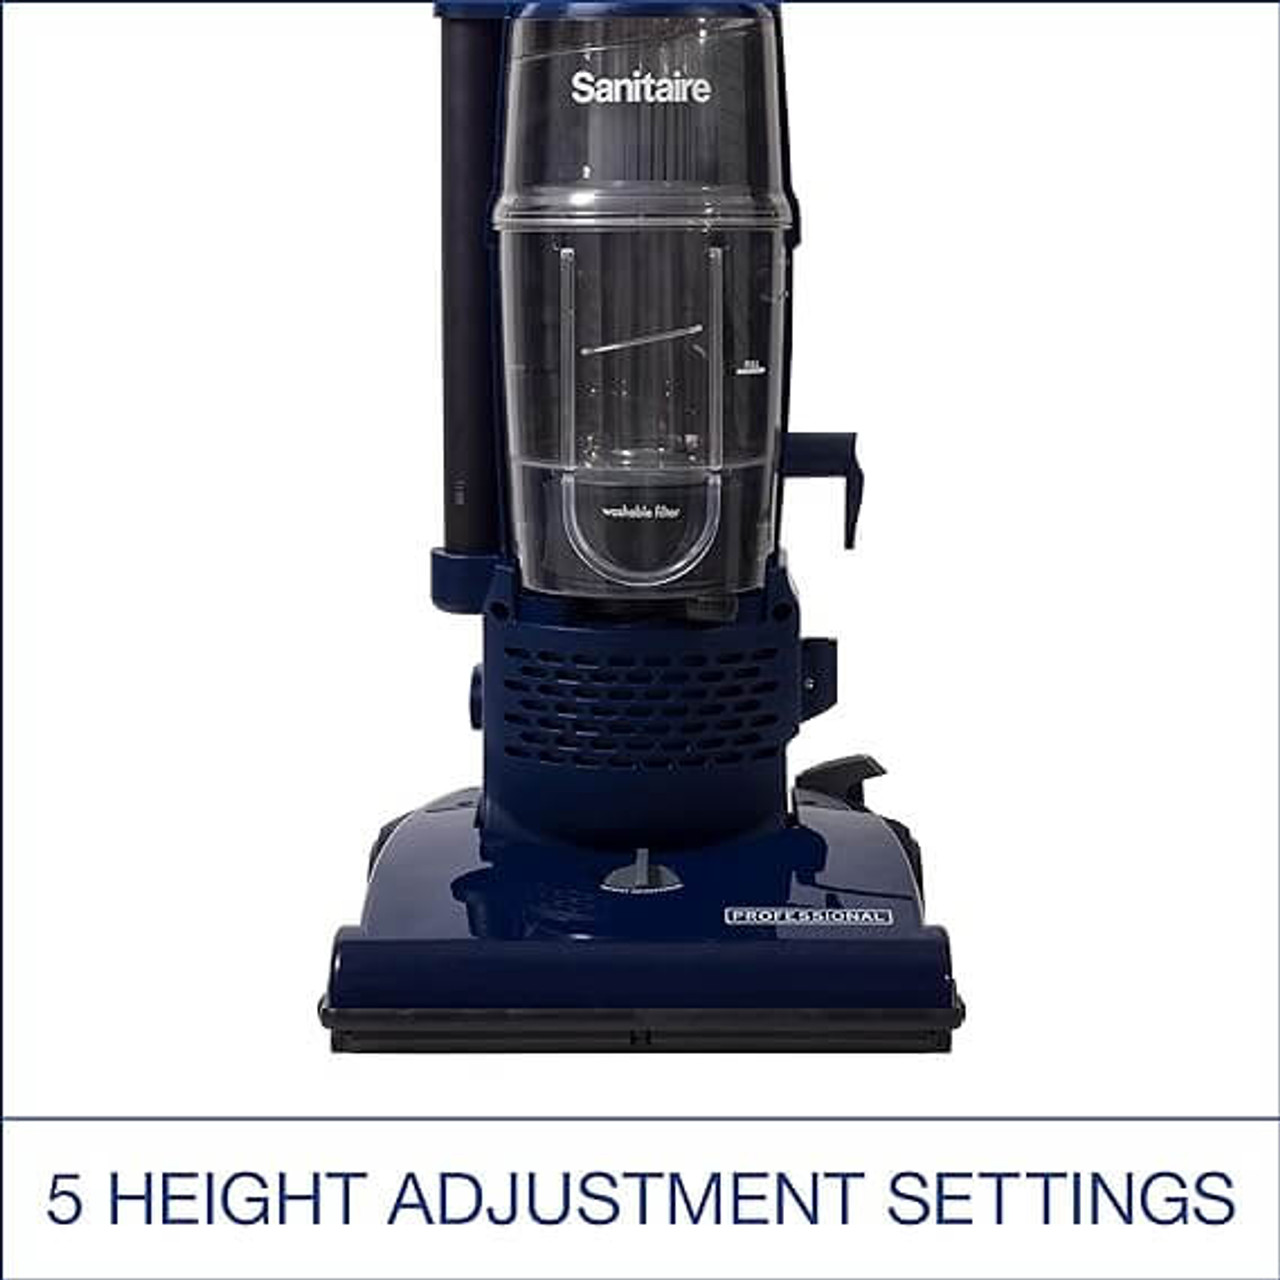 Sanitaire PROFESSIONAL 13" Bagless Upright Vacuum Cleaner | Efficient Cleaning with Professional Performance